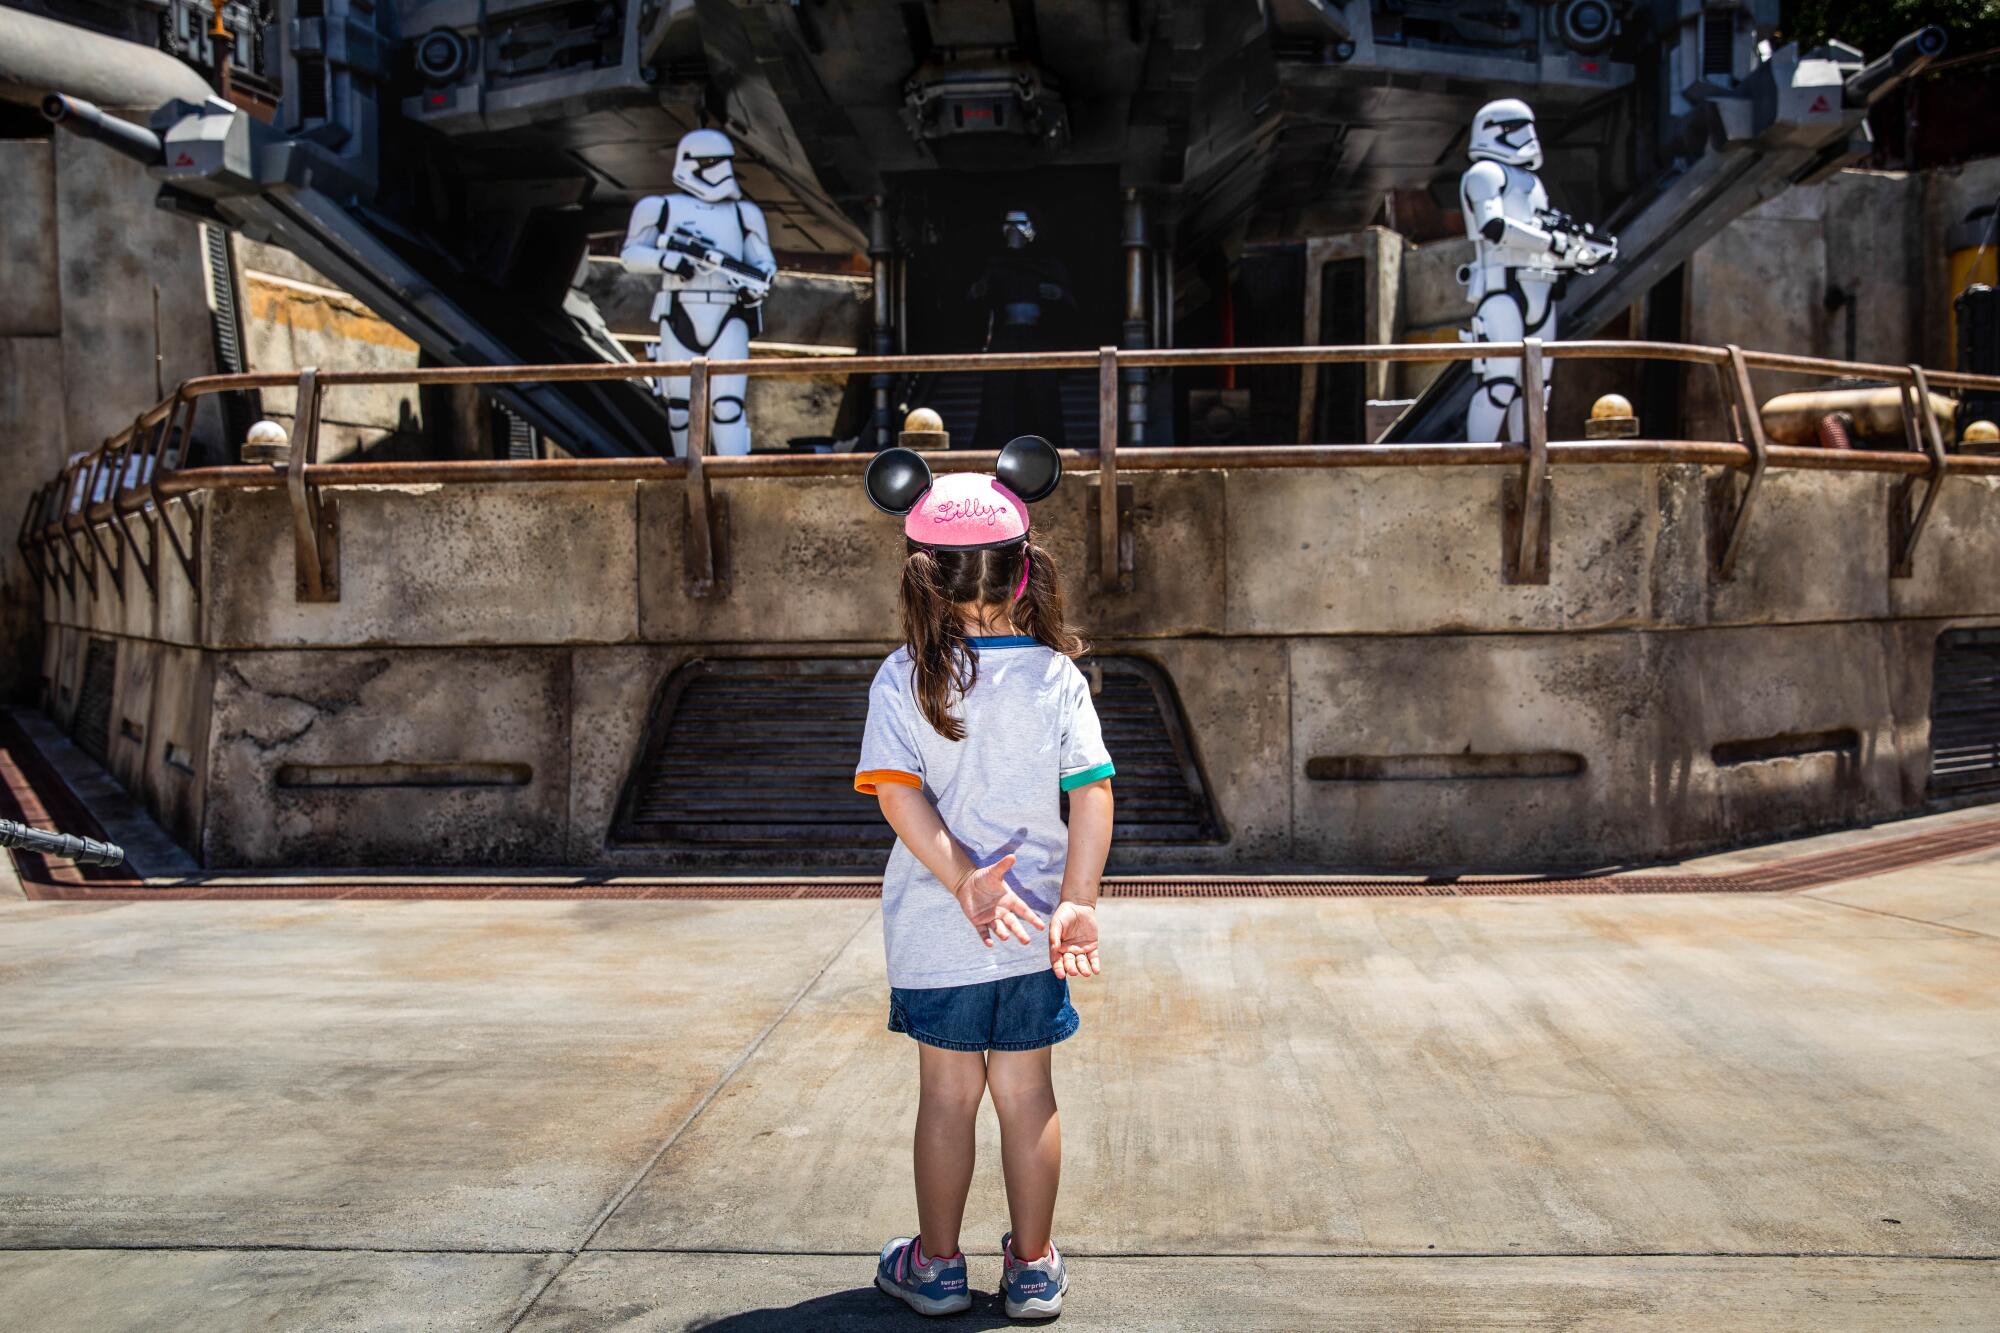 A young girl watches "Star Wars" performers on a stage 